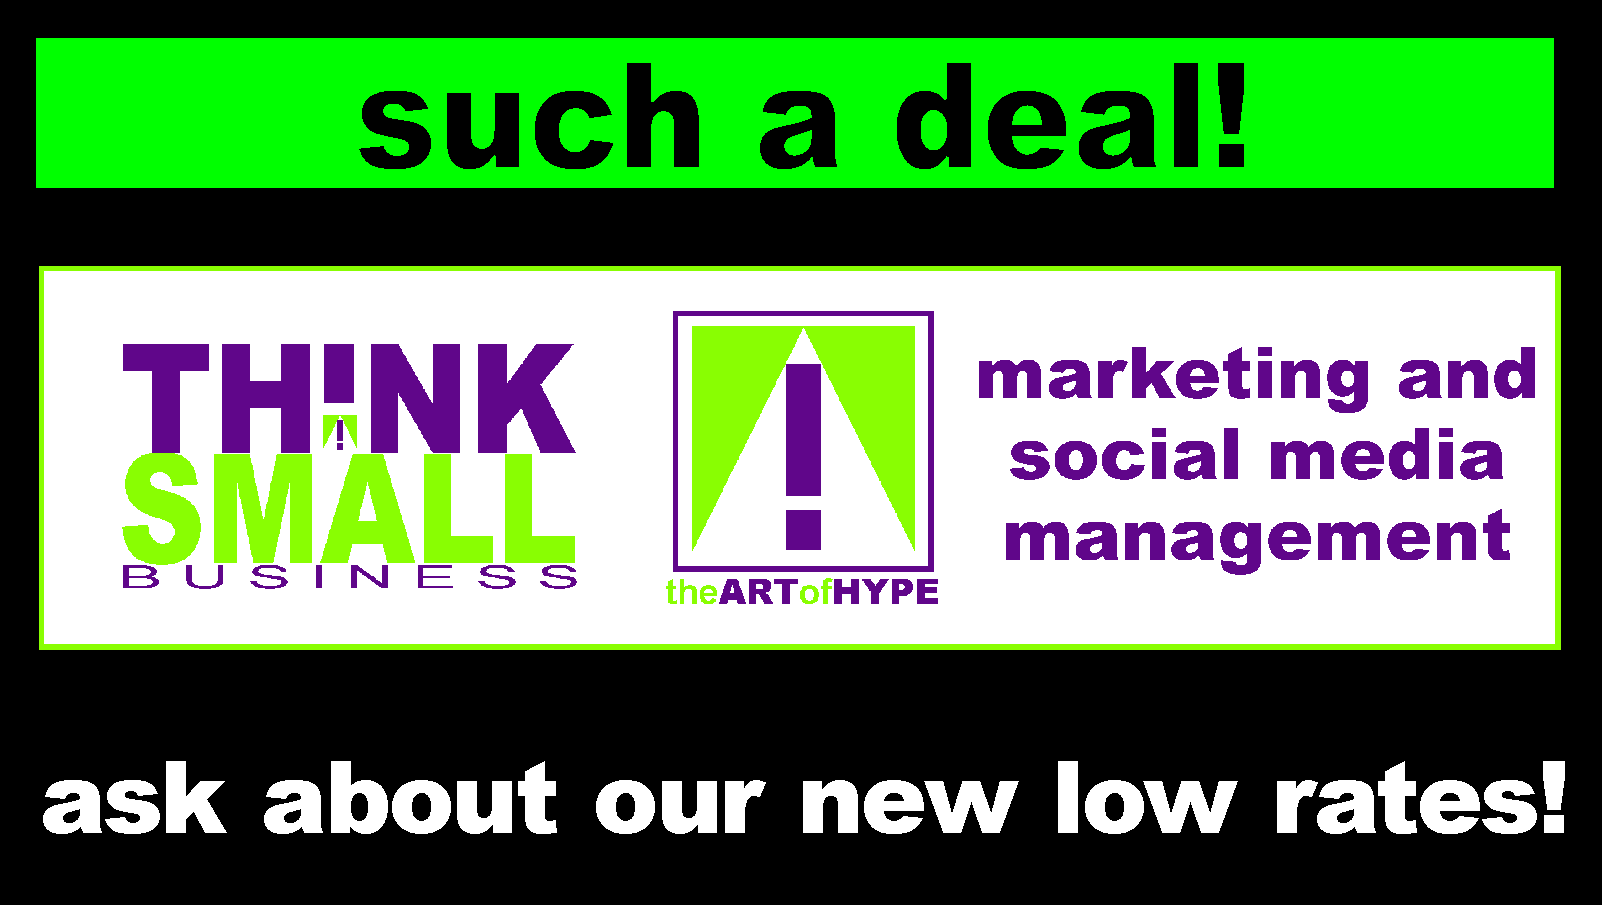 new low rates marketing facebook link